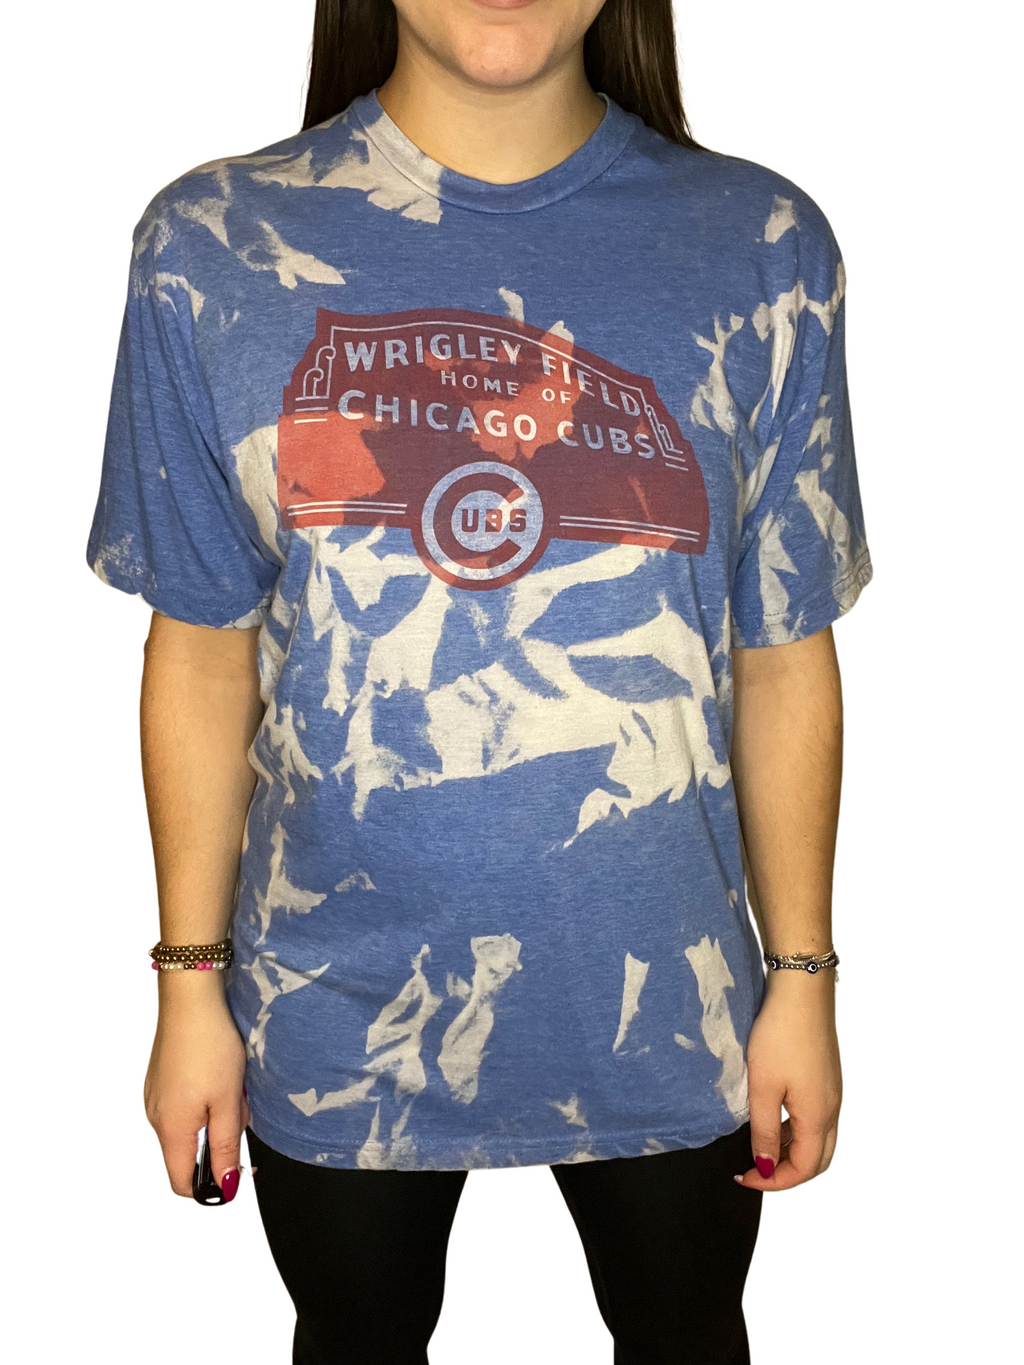 Unisex Vintage Chicago Cubs Tee - The Vintage Twin